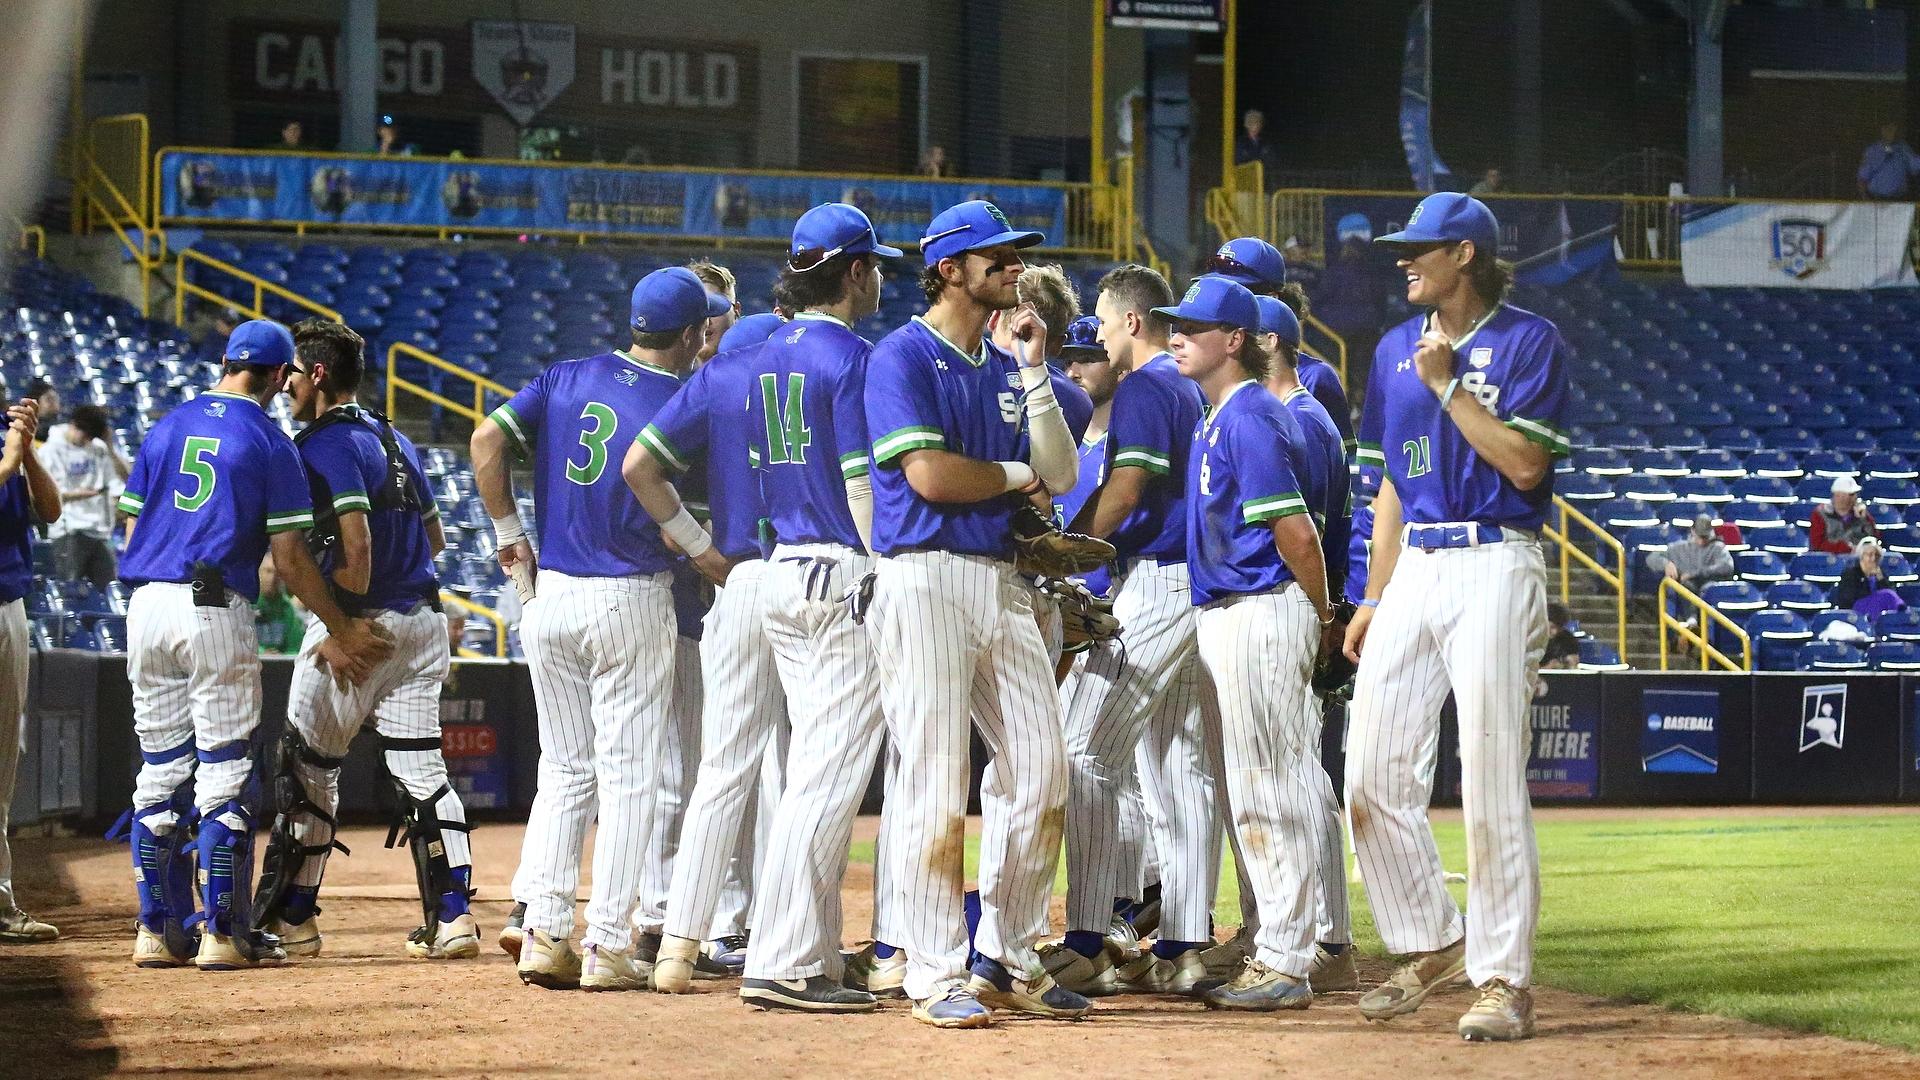 Salve Regina's greatest season came to a close on Monday as the Seahawks credit being close knit attributing to their success. (Photo by Ryan Coleman of D3PHOTOGRAPHY.COM)